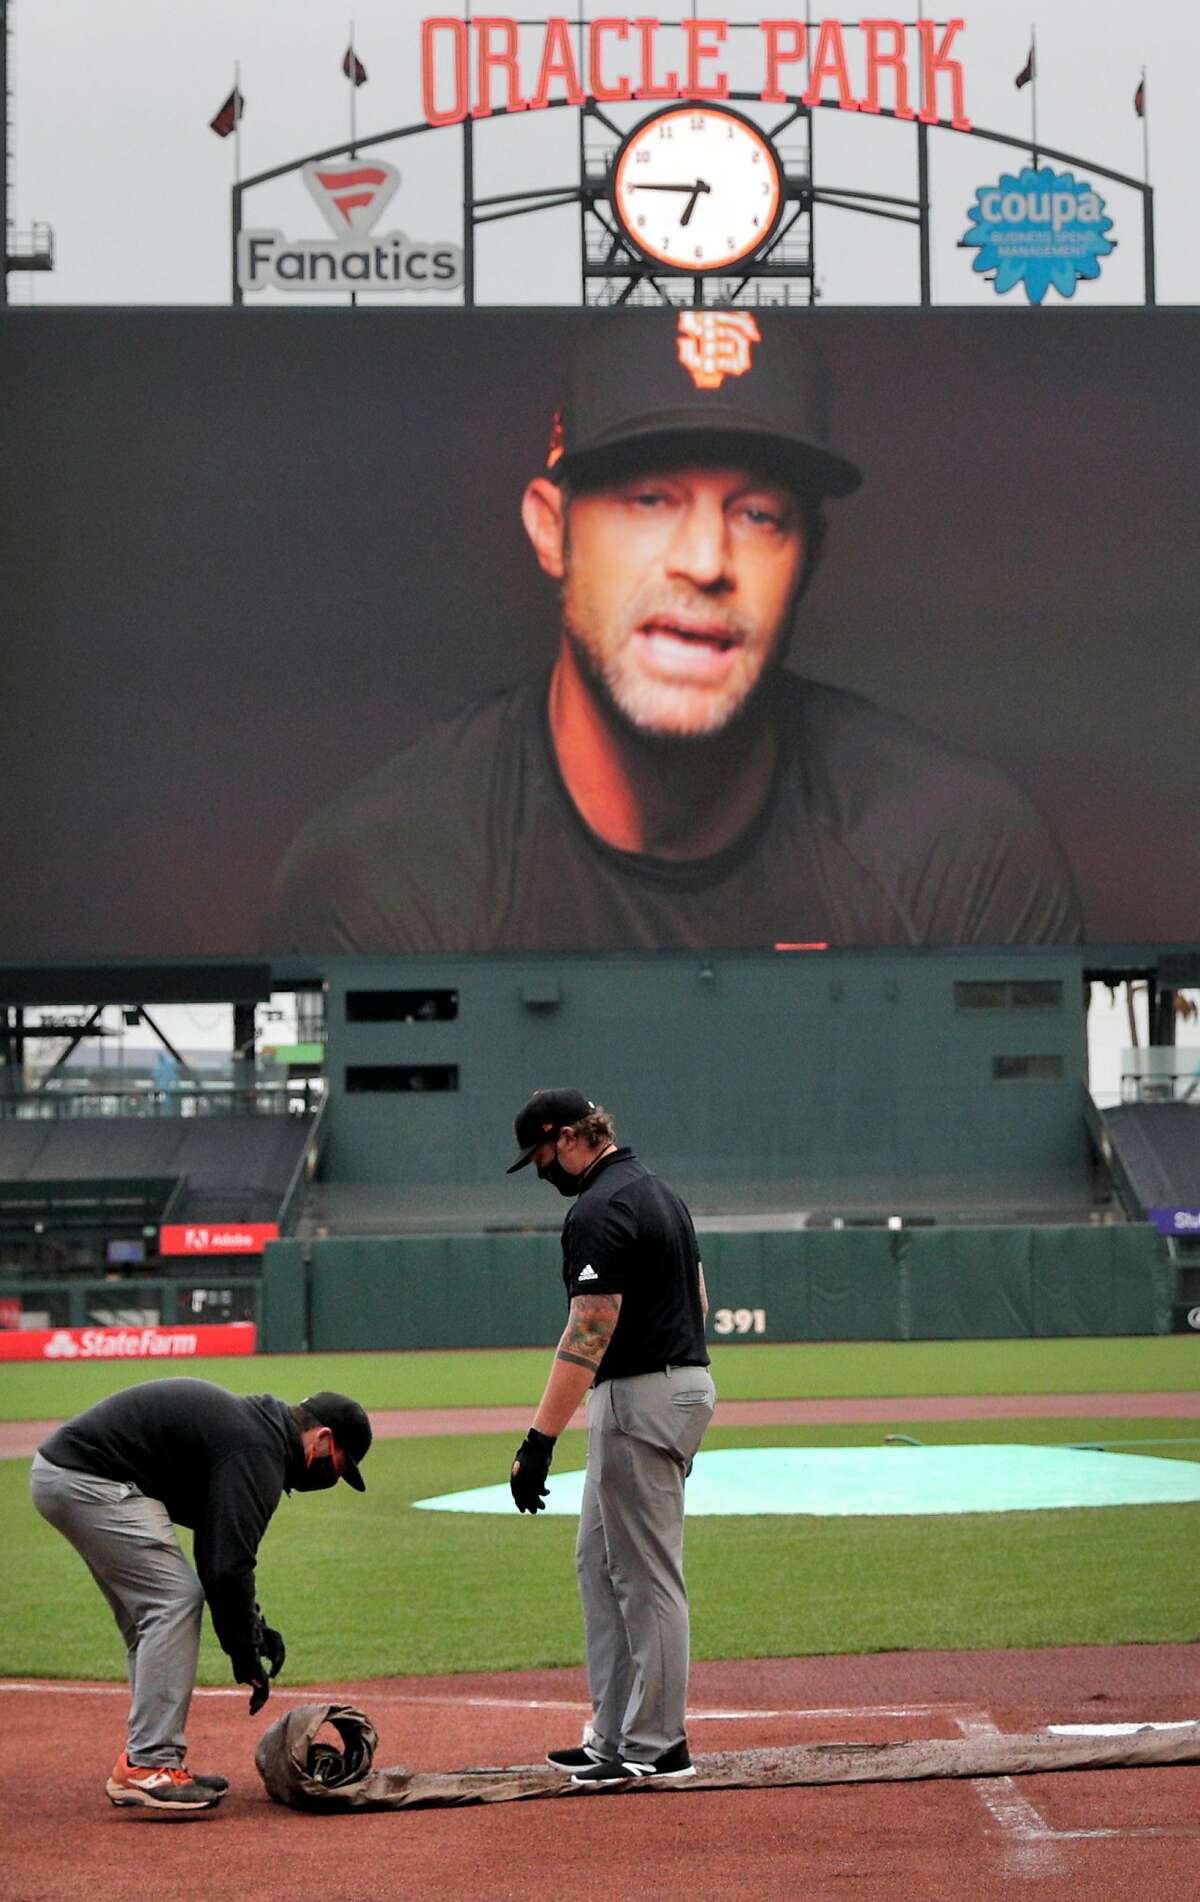 Grounds crews unroll a tarp over homeplate as a message in support if Black Lives Matter featuring manager Gabe Kapler plays on the scoreboard after the game between the San Francisco Giants and the Los Angeles Dodgers was postponed at Oracle Park in San Francisco, Calif., on Wednesday, August 26, 2020.